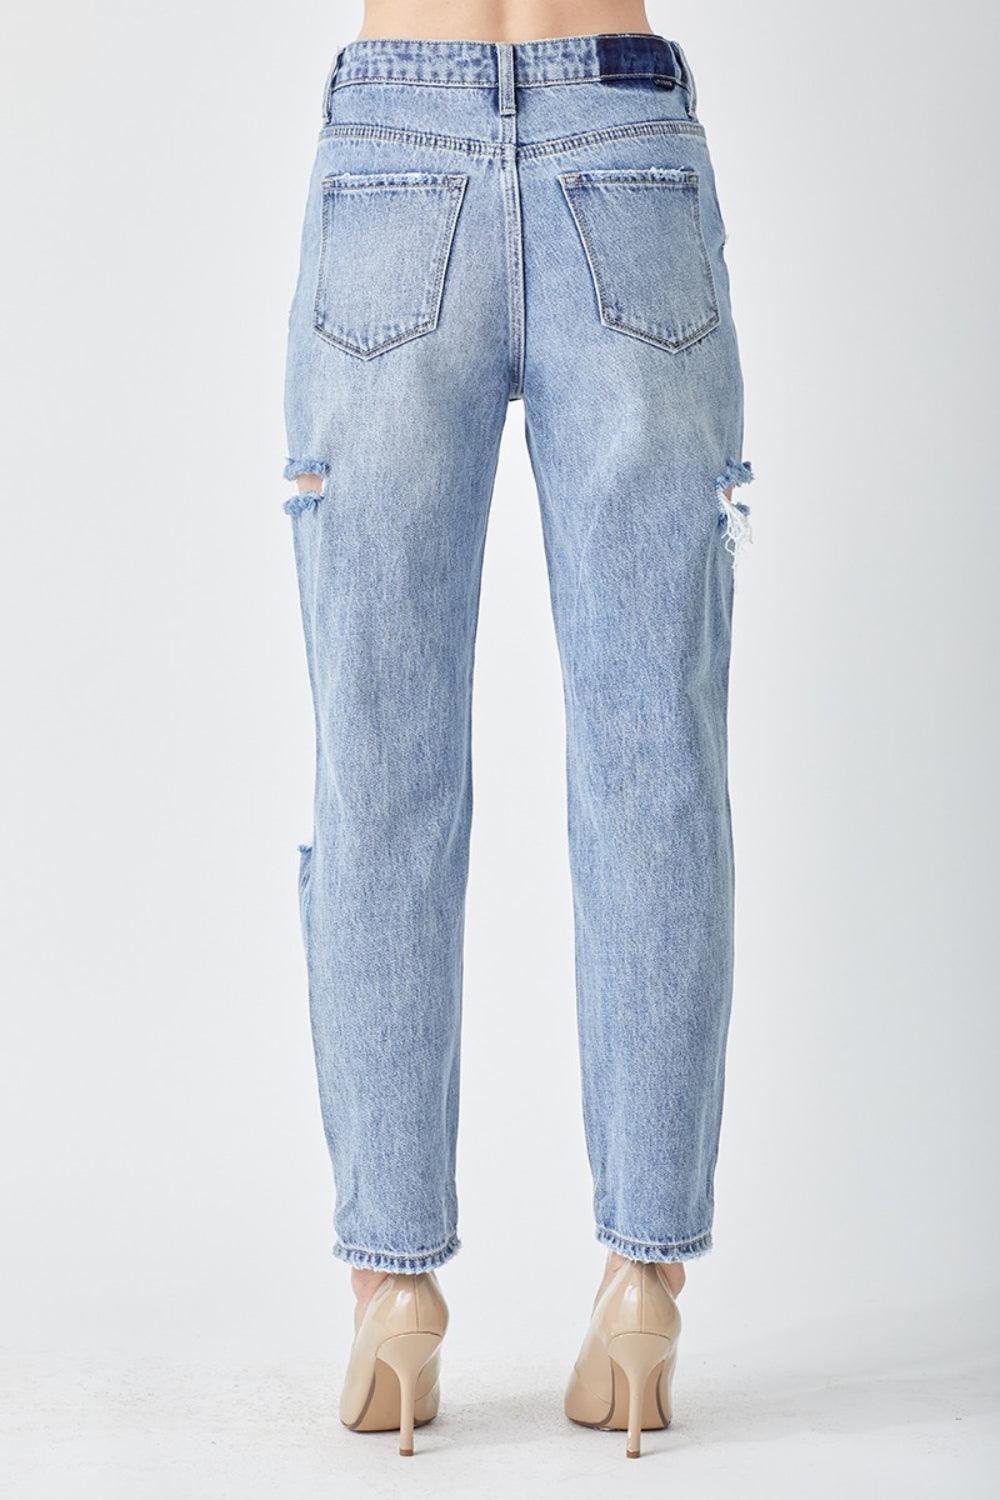 RISEN Distressed Slim Cropped Jeans Jeans